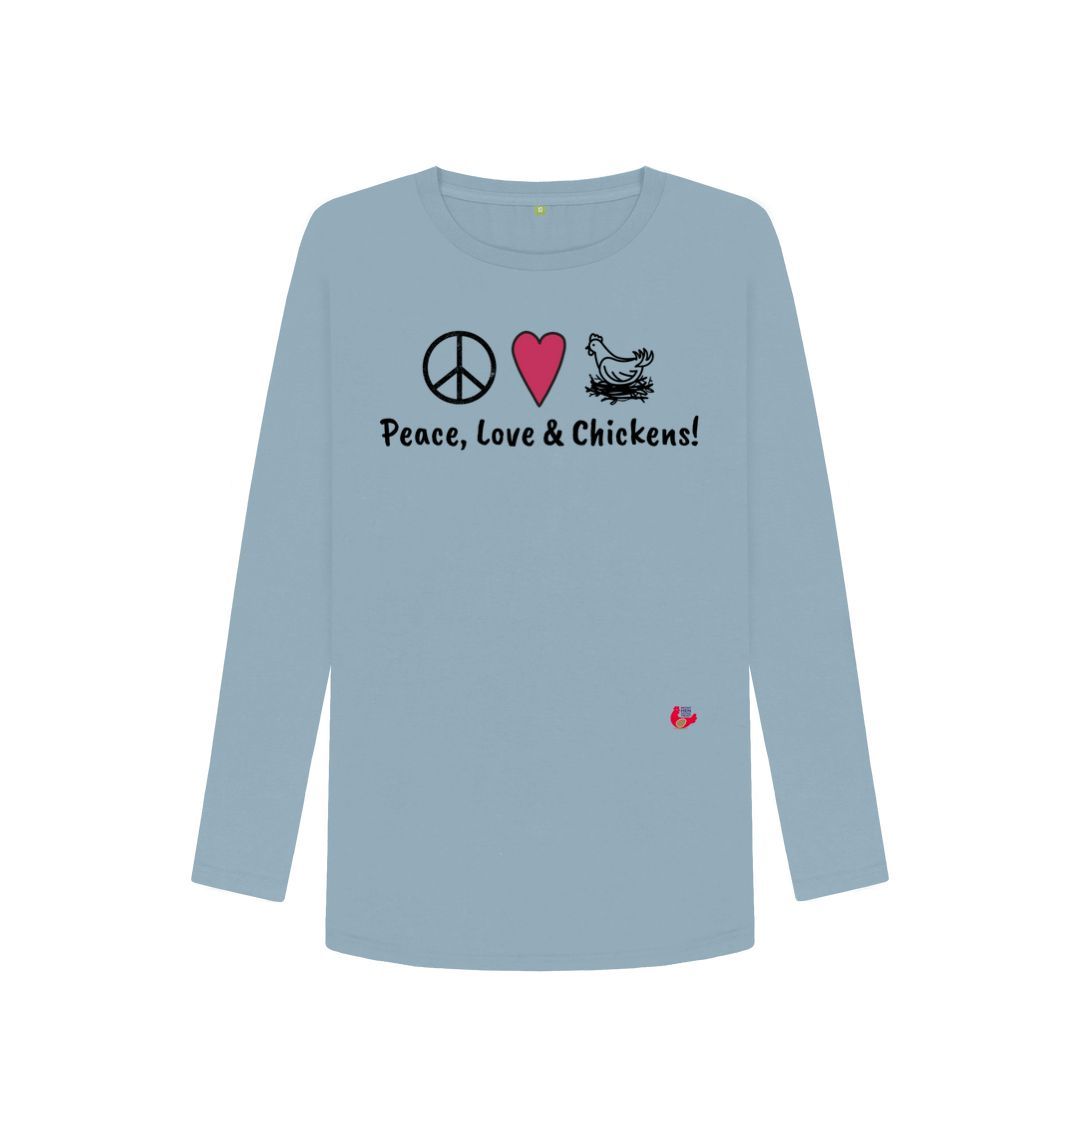 Stone Blue Women's Long Sleeve T-Shirt - Peace, Love & Chickens - Large Logo